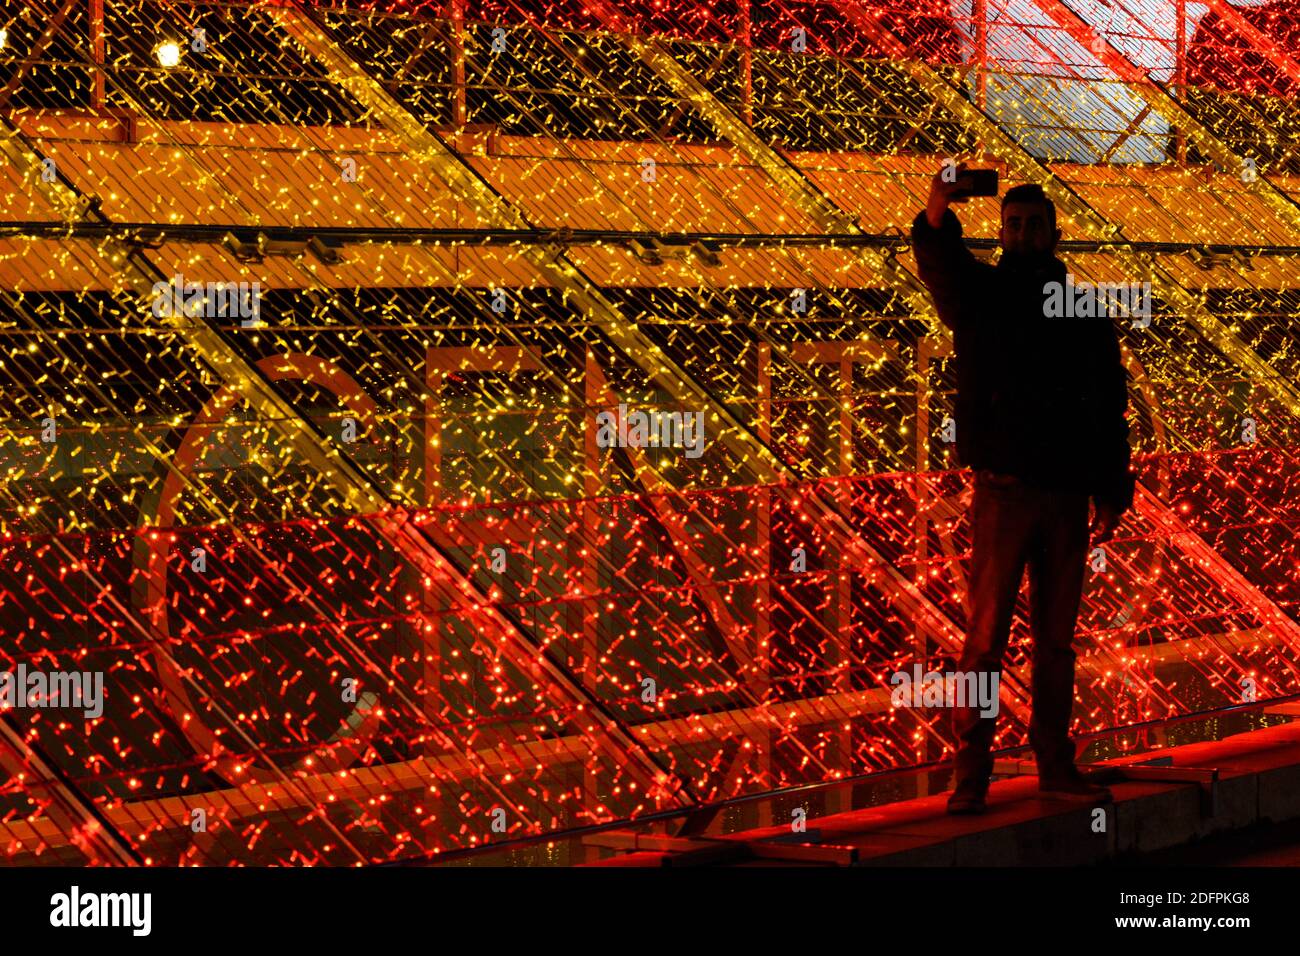 People taking photos with the Christmas lights in the City of Madrid. One of the illuminations where people take photos is next to the Spanish flag in Plaza de Colón, Madrid.Restriction measures for access to Plaza de la Puerta del Sol in Madrid. The Madrid government has made the decision to monitor access to the busy Puerta del Sol square in Madrid after the covid-19 health crisis. Stock Photo